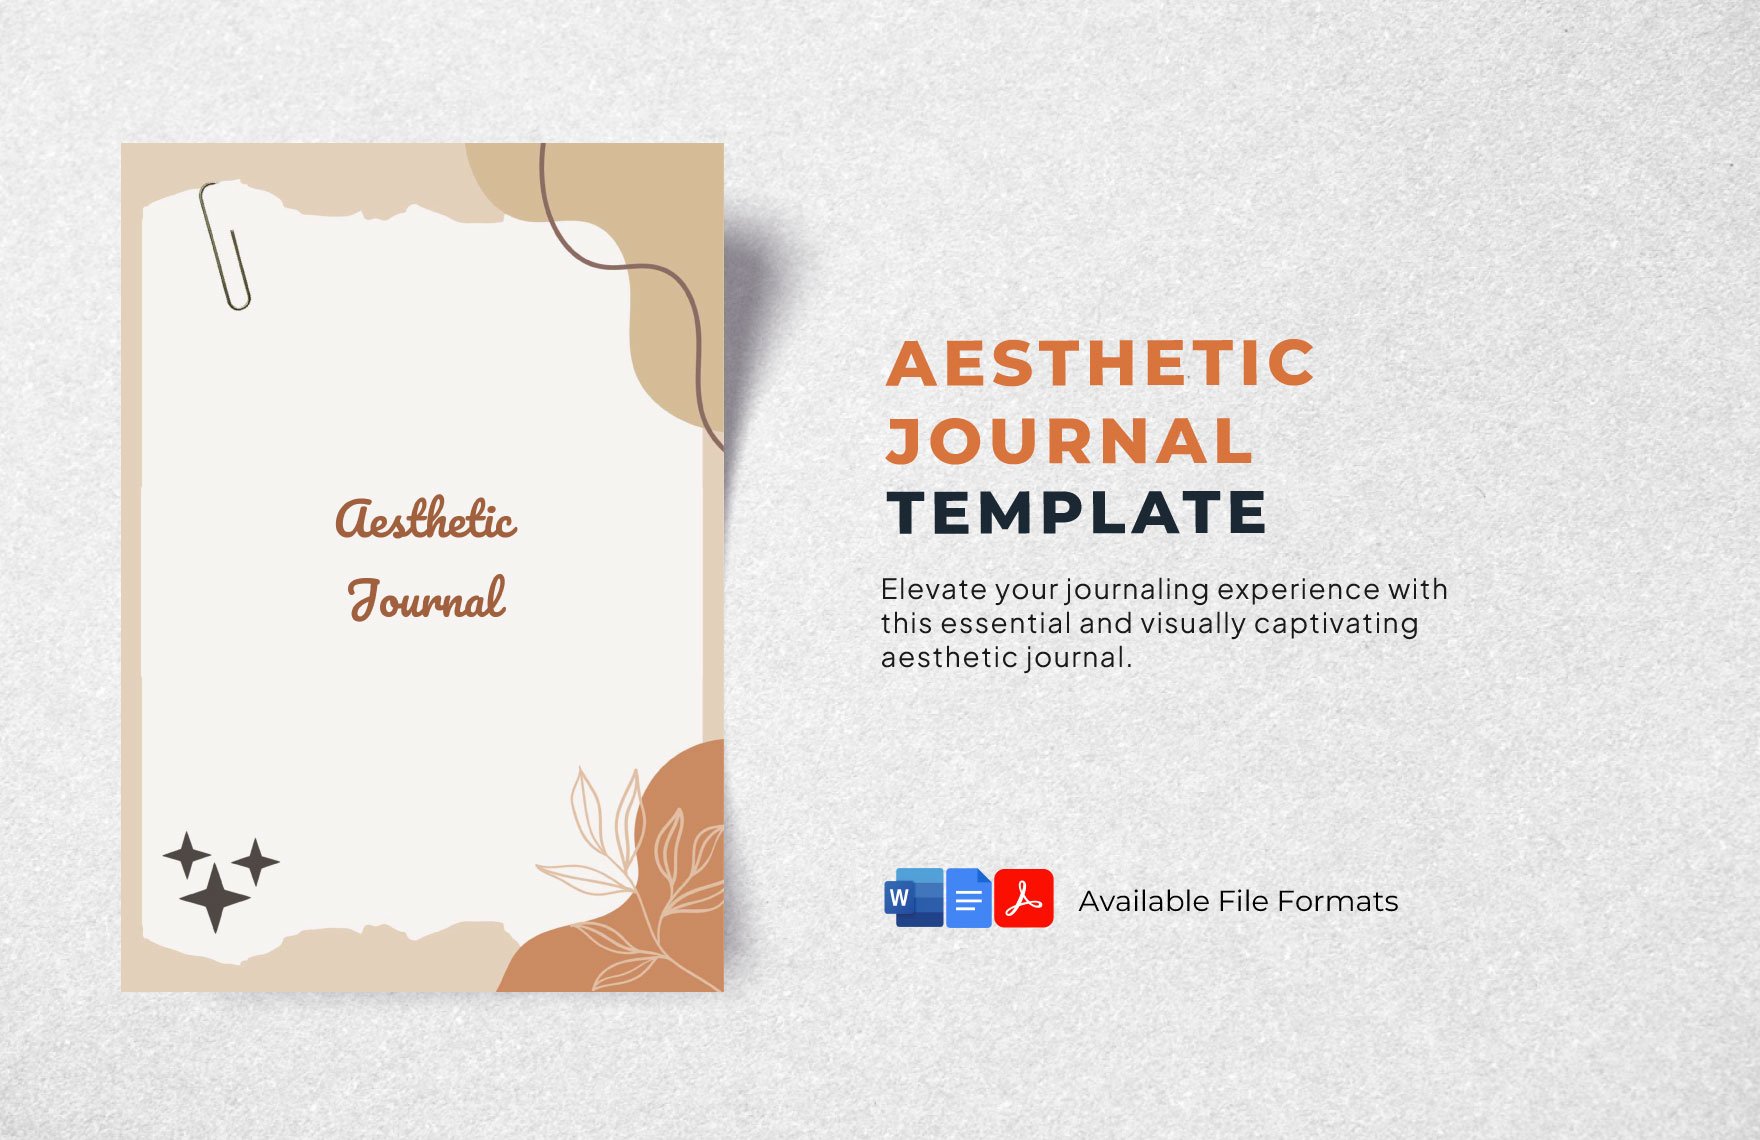 CAesthetic Journal Template in Word, Google Docs, PDF, Apple Pages